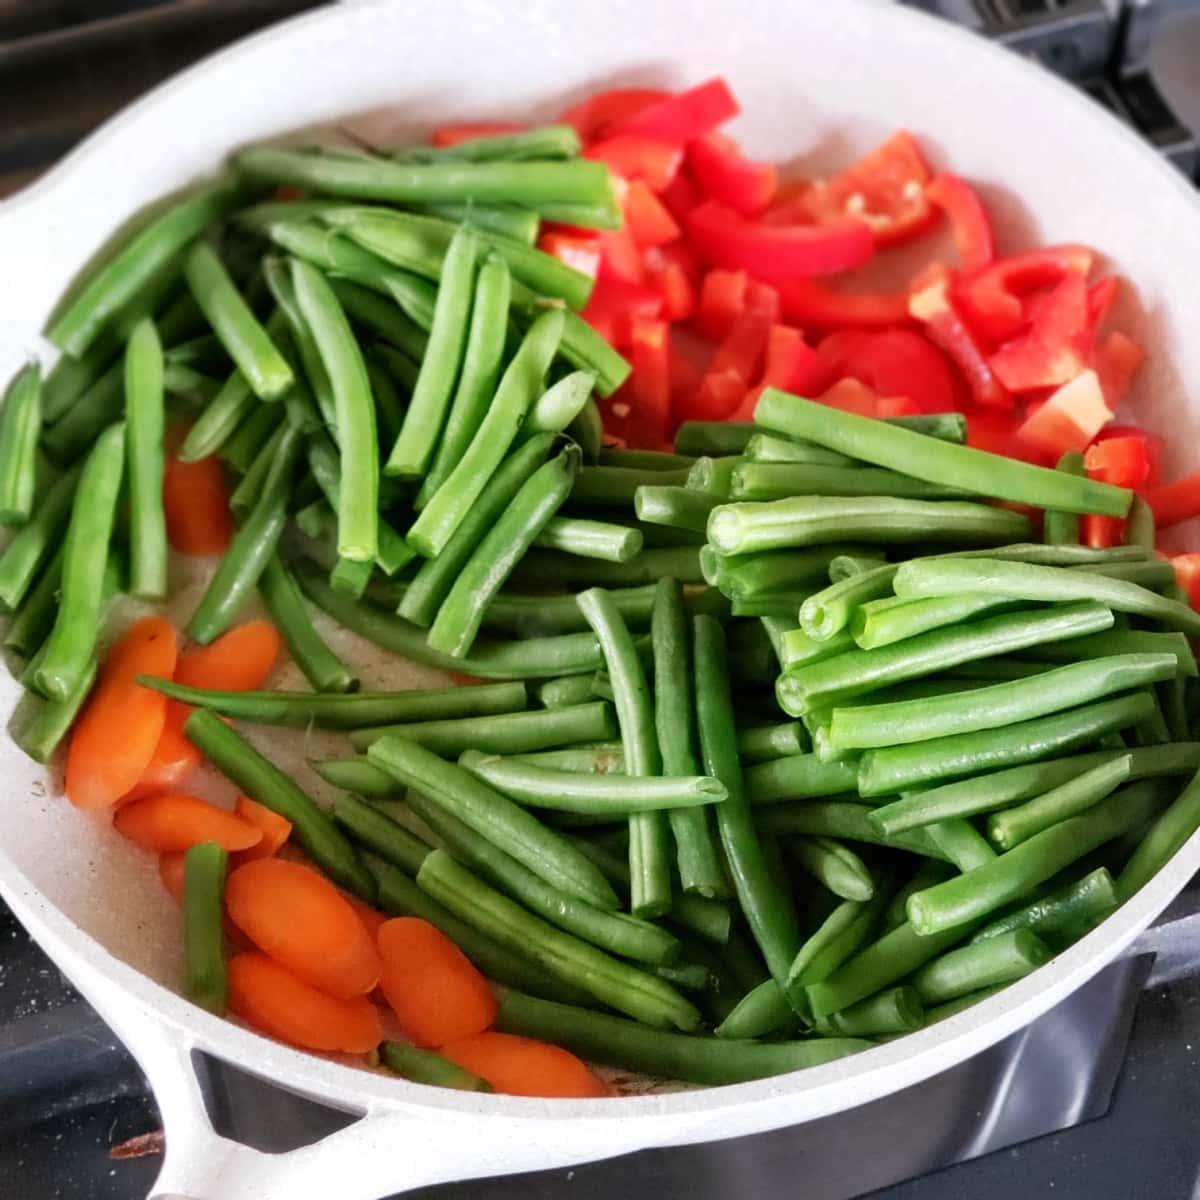 Green beans, carrots and red pepper in a light colored skillet